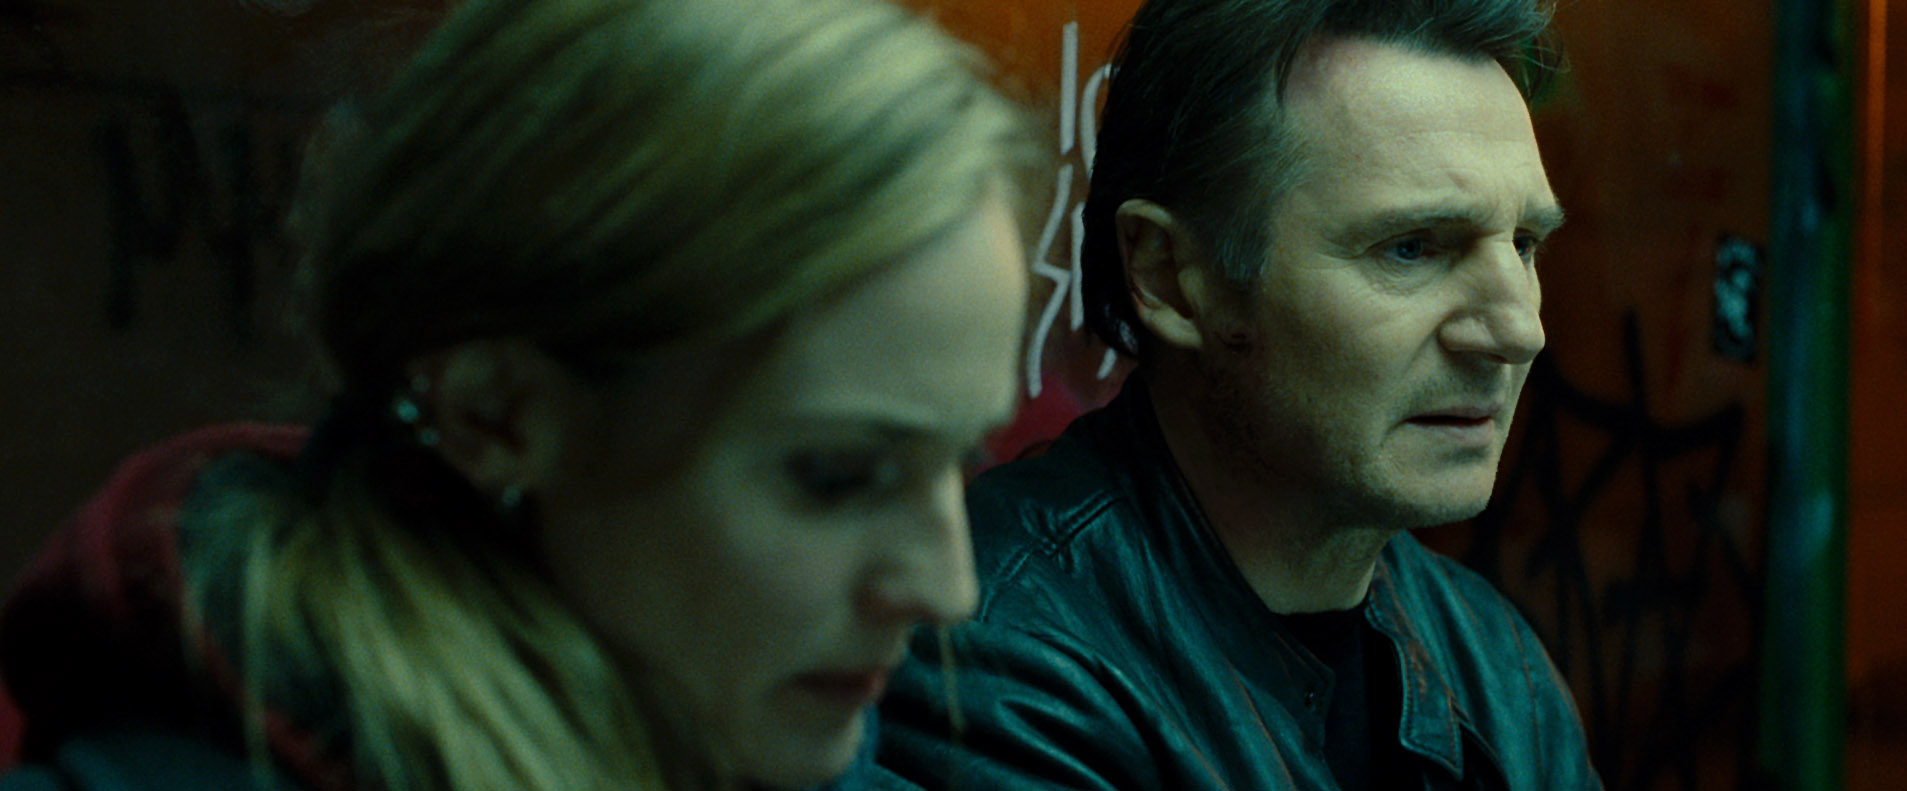  Diane Kruger as Gina and Liam Neeson as Dr. Martin Harris in Dark Castle Entertainment's thriller Unknown, a Warner Bros. Pictures release.